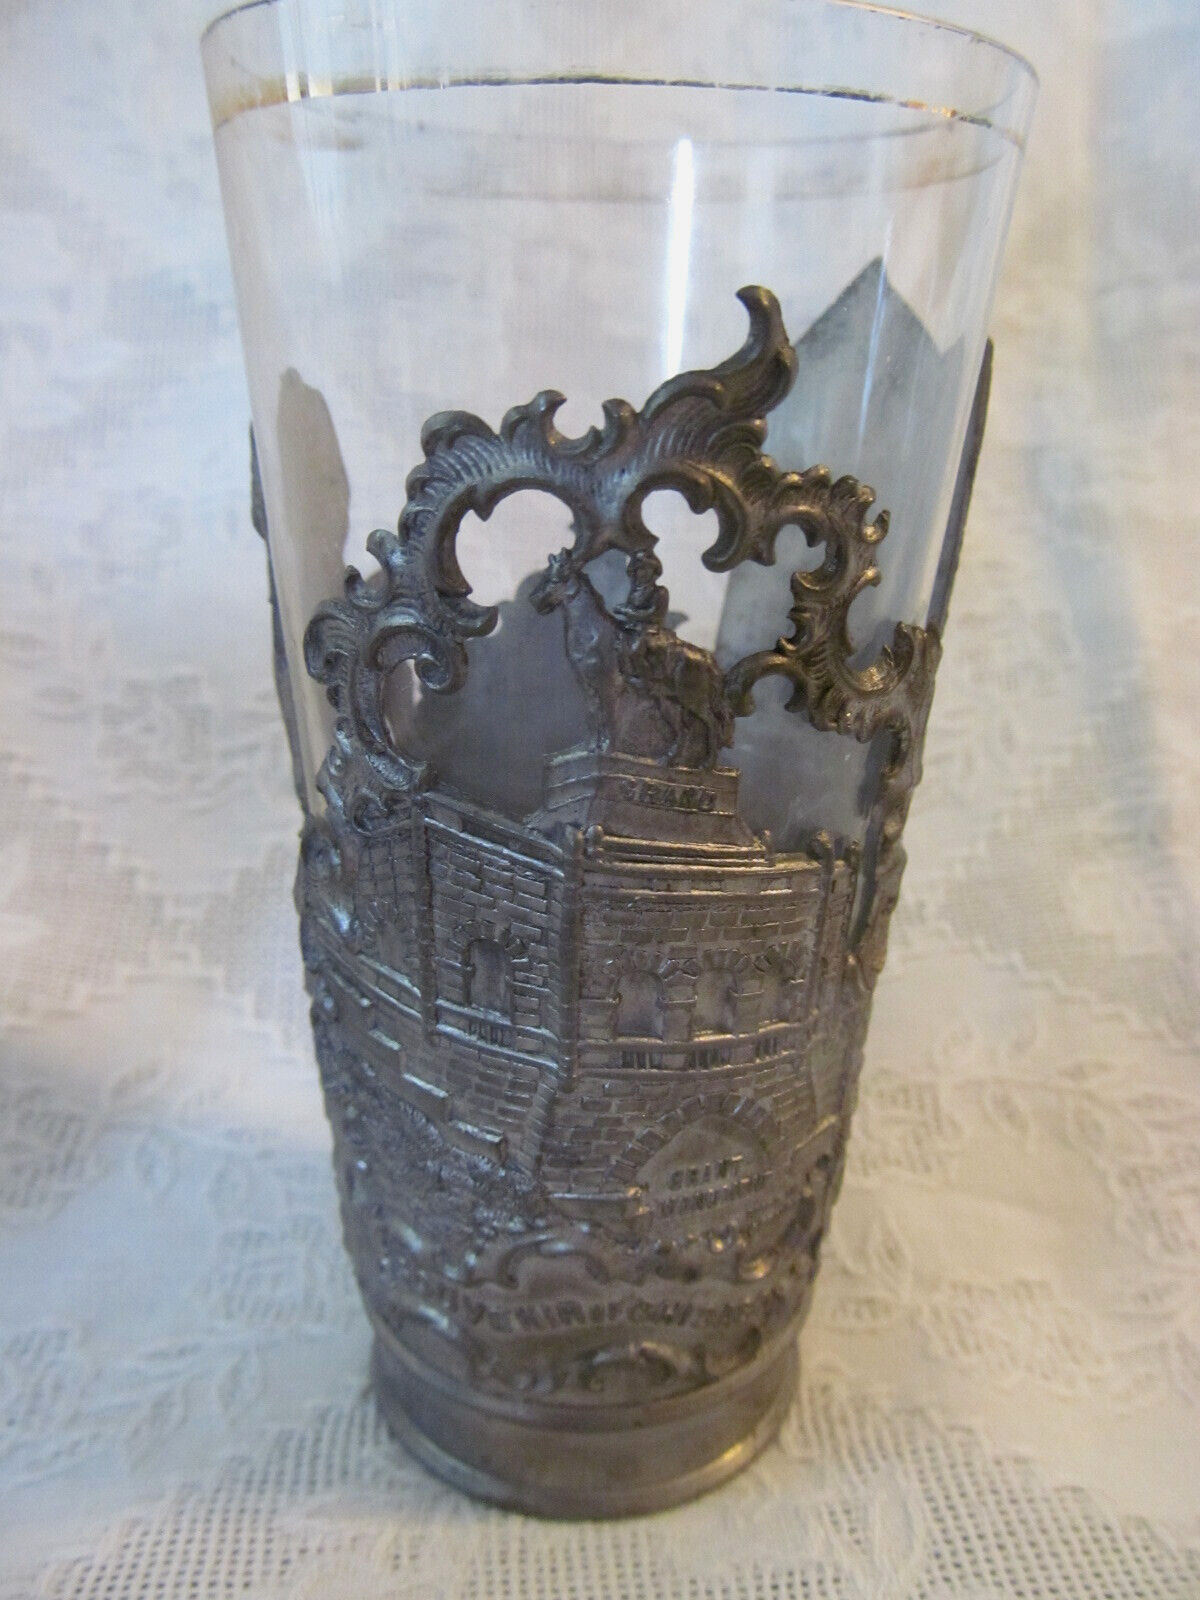 early 1900s~Antique Chicago Souvenir Tumbler Pewter Sleeve Covering Glass